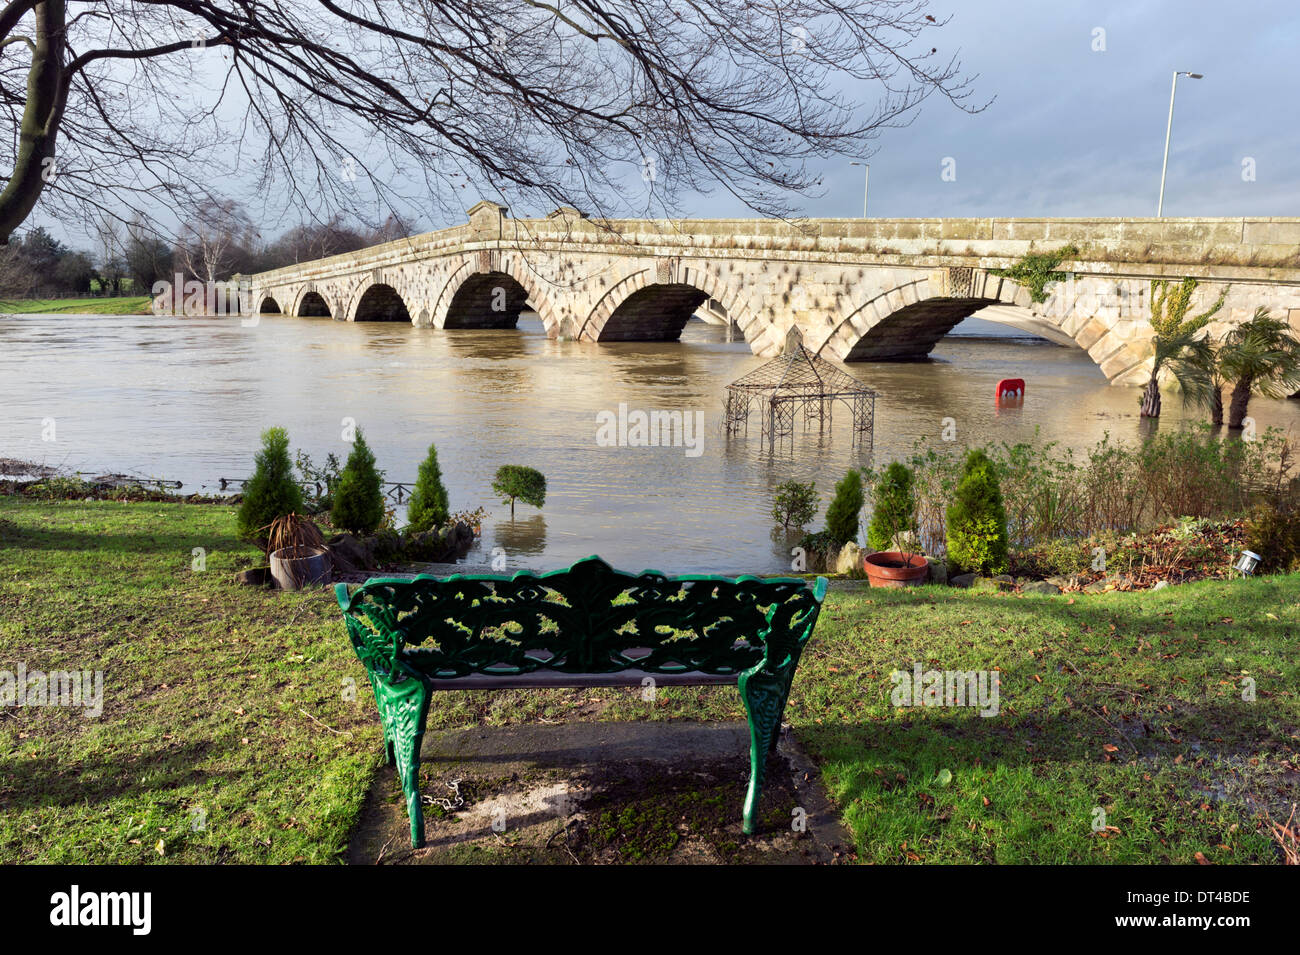 Shropshire, UK. 8th February 2014. The old road bridge and The River Severn at Atcham, near Shrewsbury, Shropshire, seen from the flooded garden of The Mytton & Mermaid Hotel. Credit:  John Bentley/Alamy Live News Stock Photo